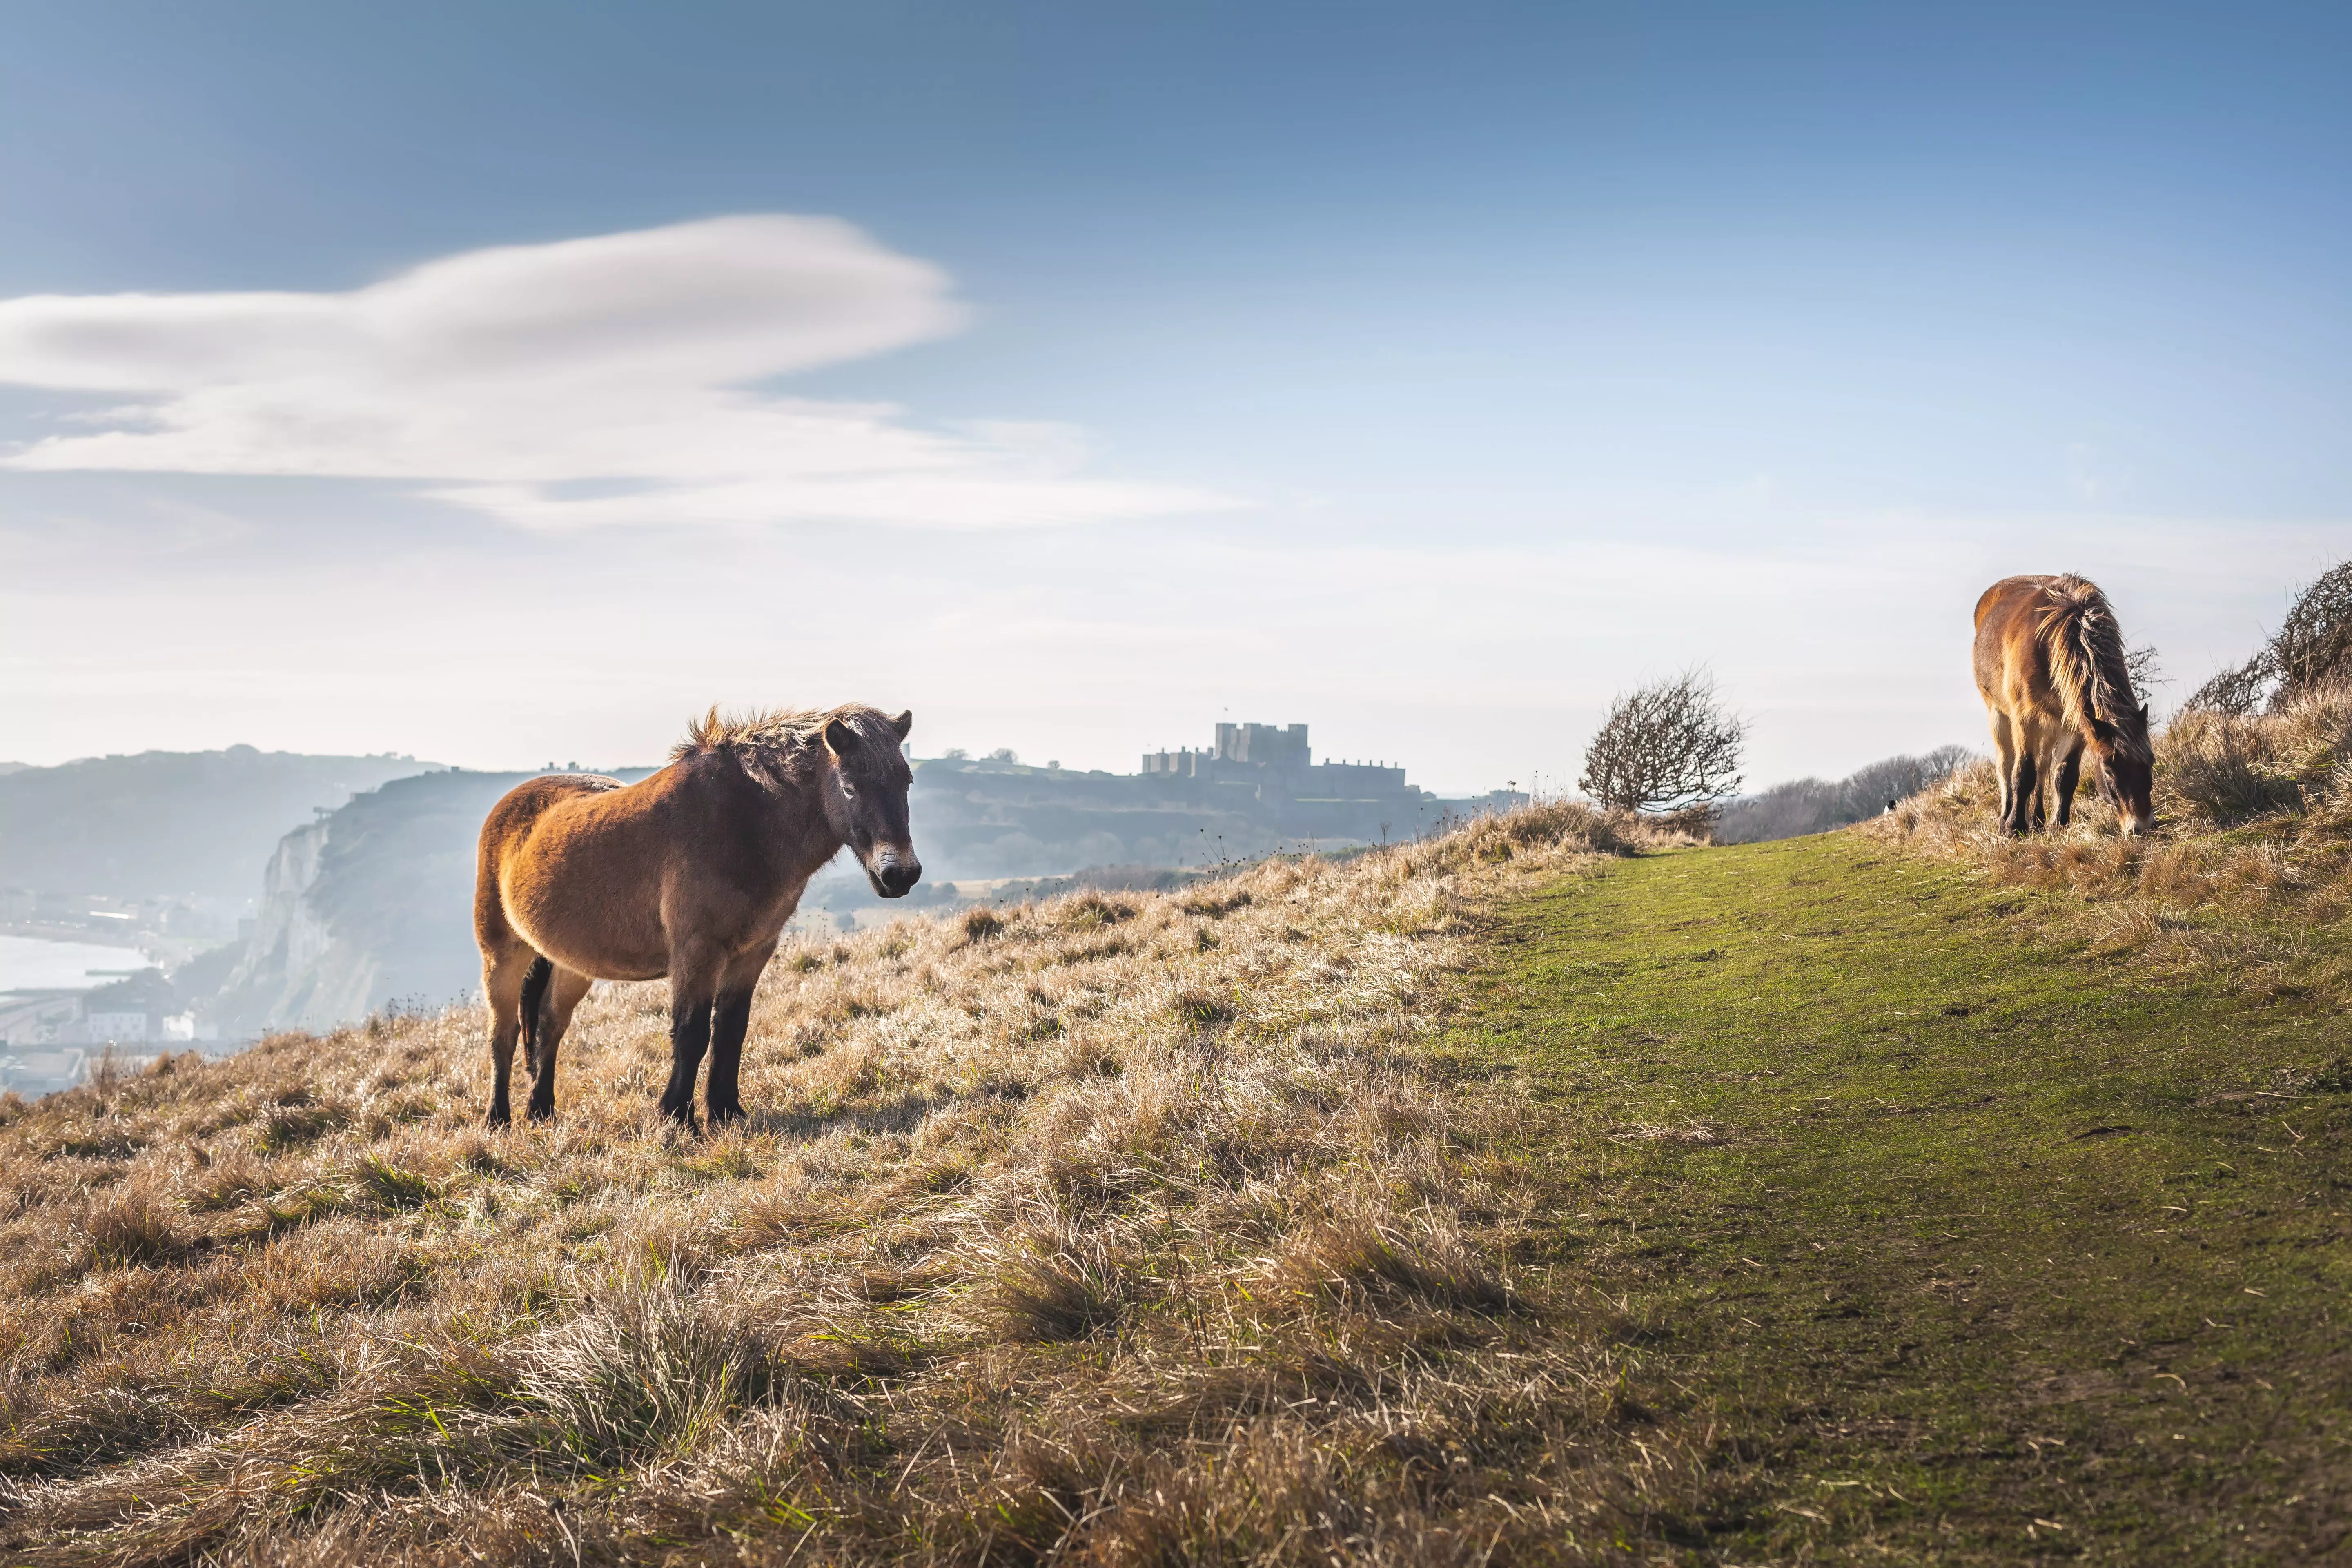 Exmoor Wild horse on the top of the hill, with Dover Castle in the background.